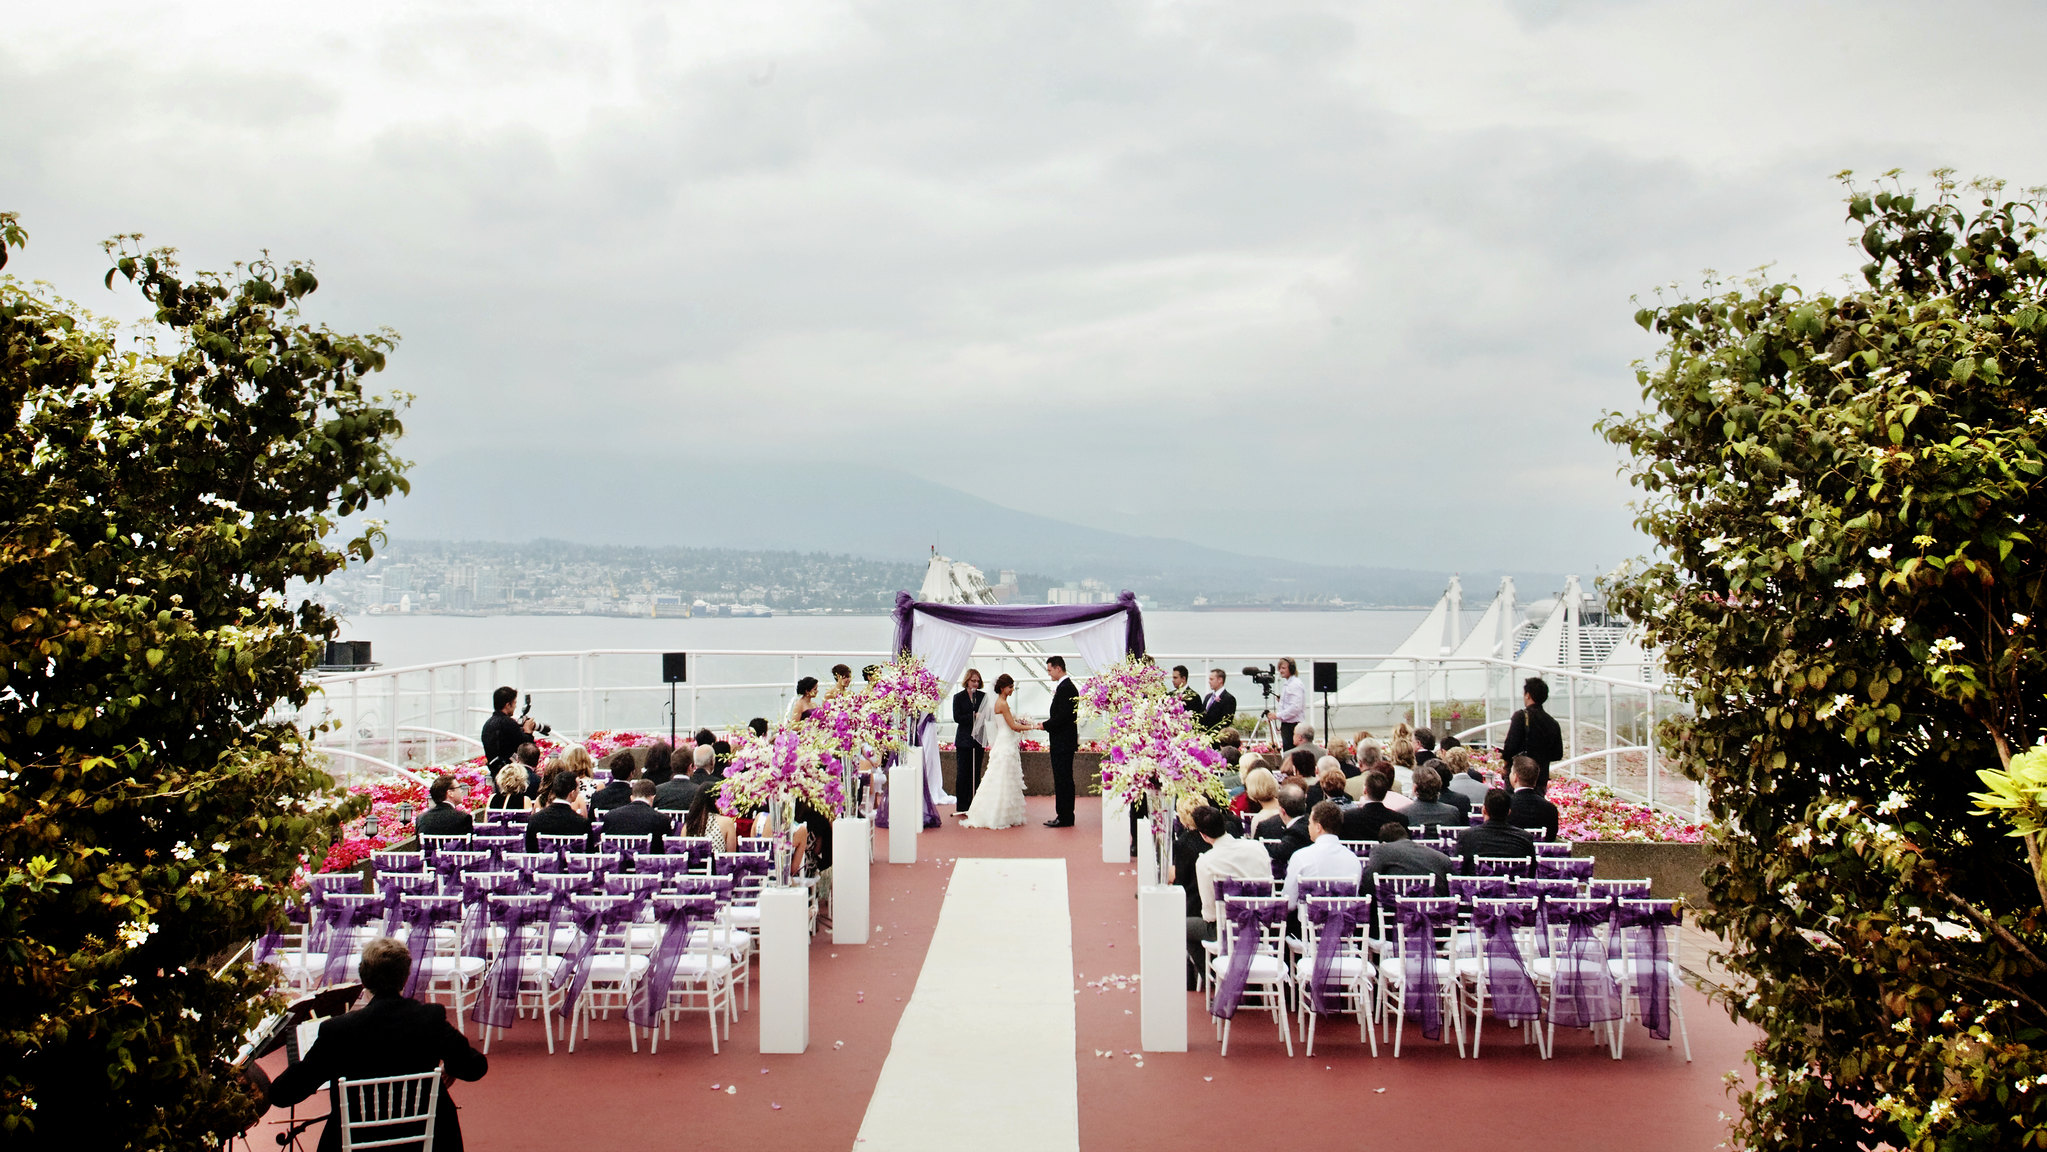 A rooftop wedding. The ocean is visible in the distance.